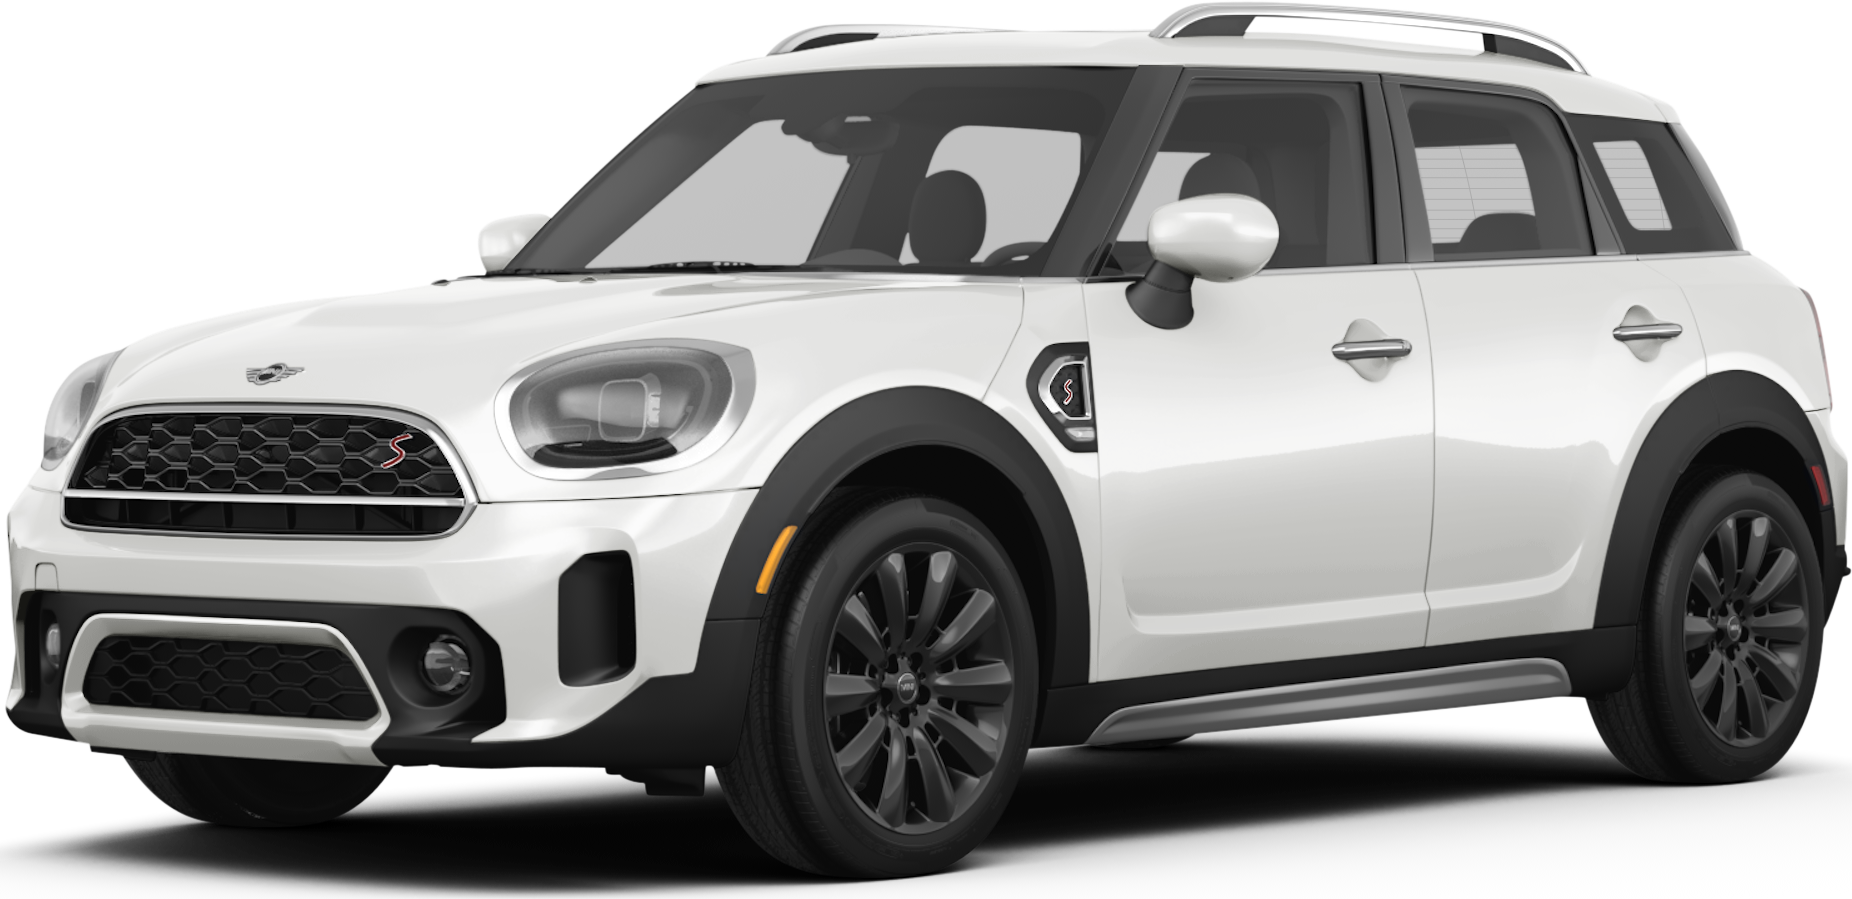 https://file.kelleybluebookimages.com/kbb/base/evox/CP/52782/2024-MINI-Countryman-front_52782_032_1852x899_C6A_cropped.png